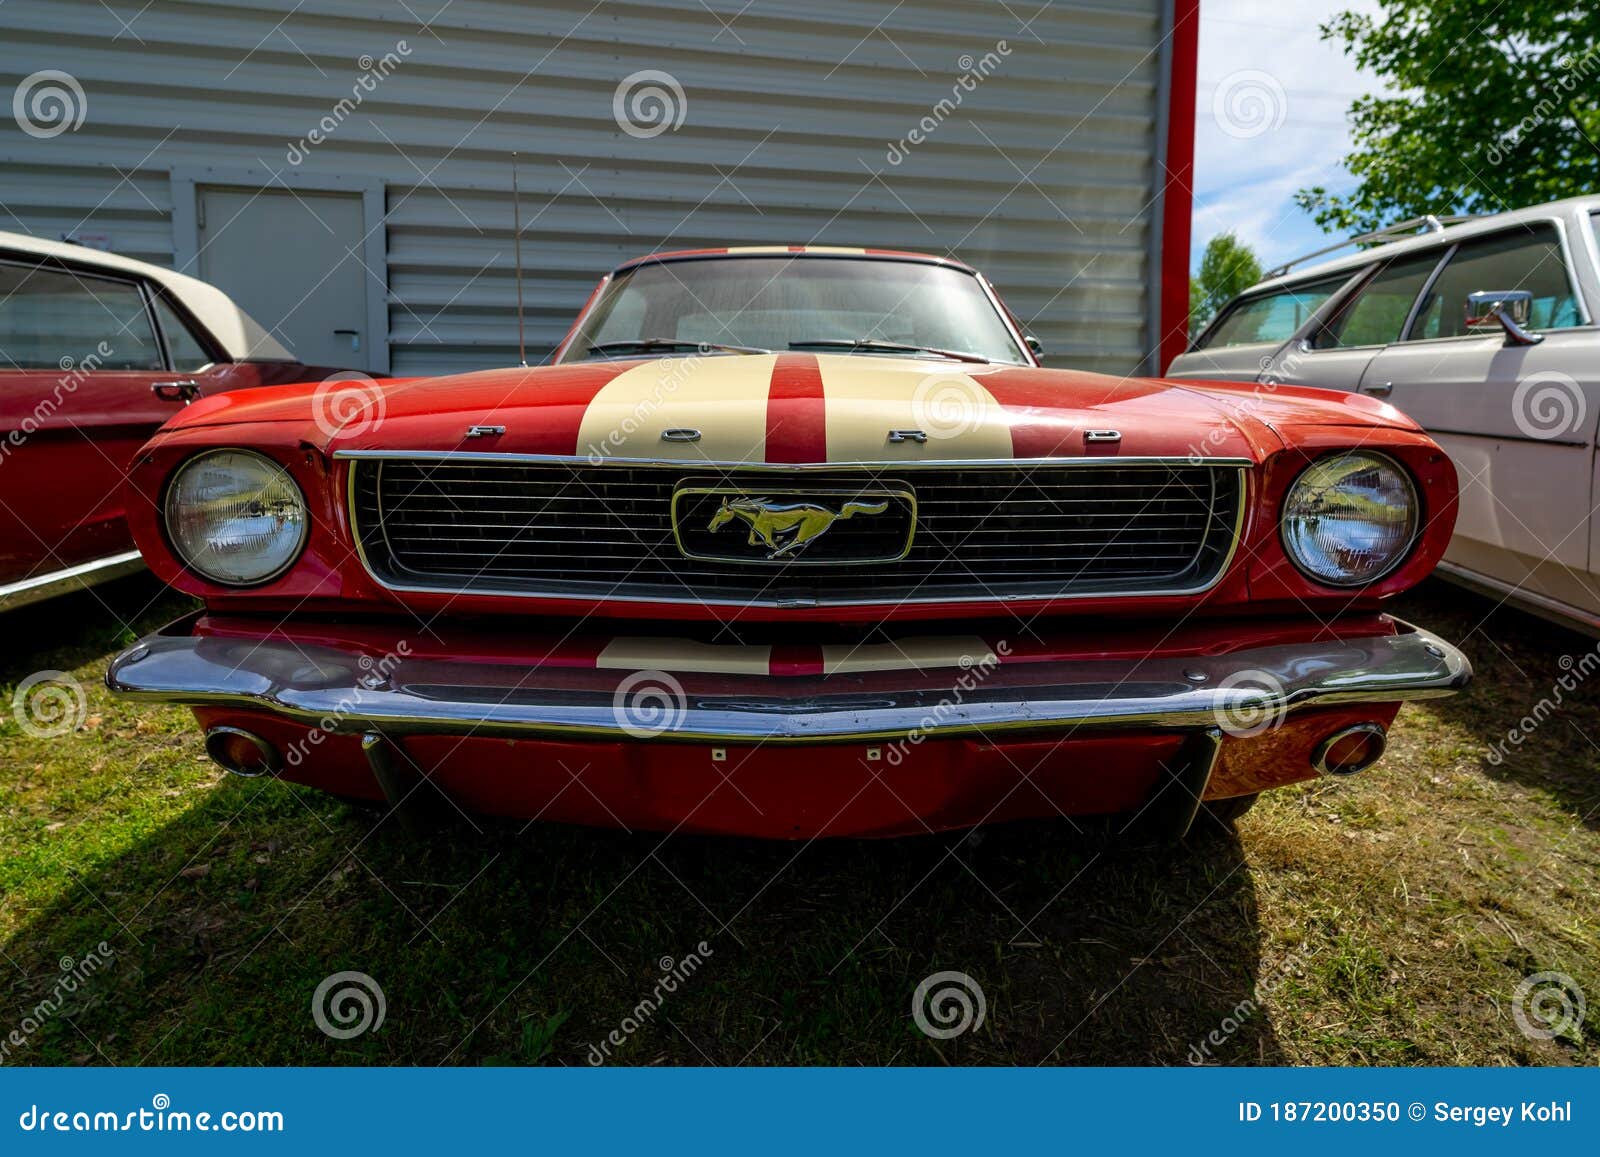 Sports car Ford Mustang editorial image. Image of berlin - 187200350